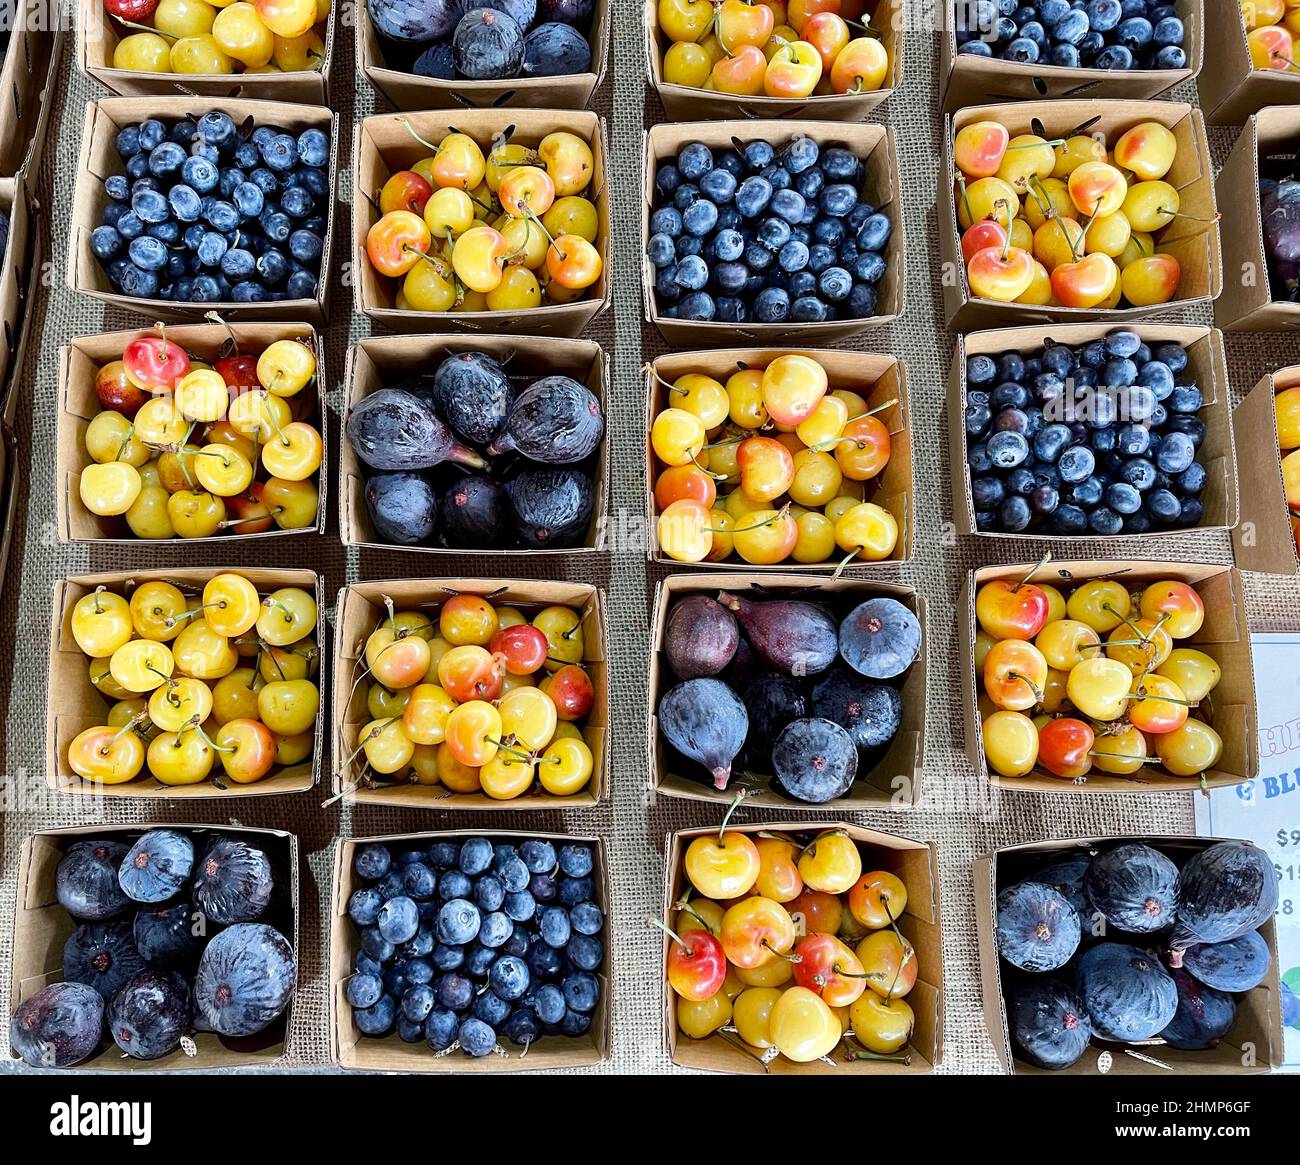 colorful arrangement of fresh fruit at the farm stand Stock Photo